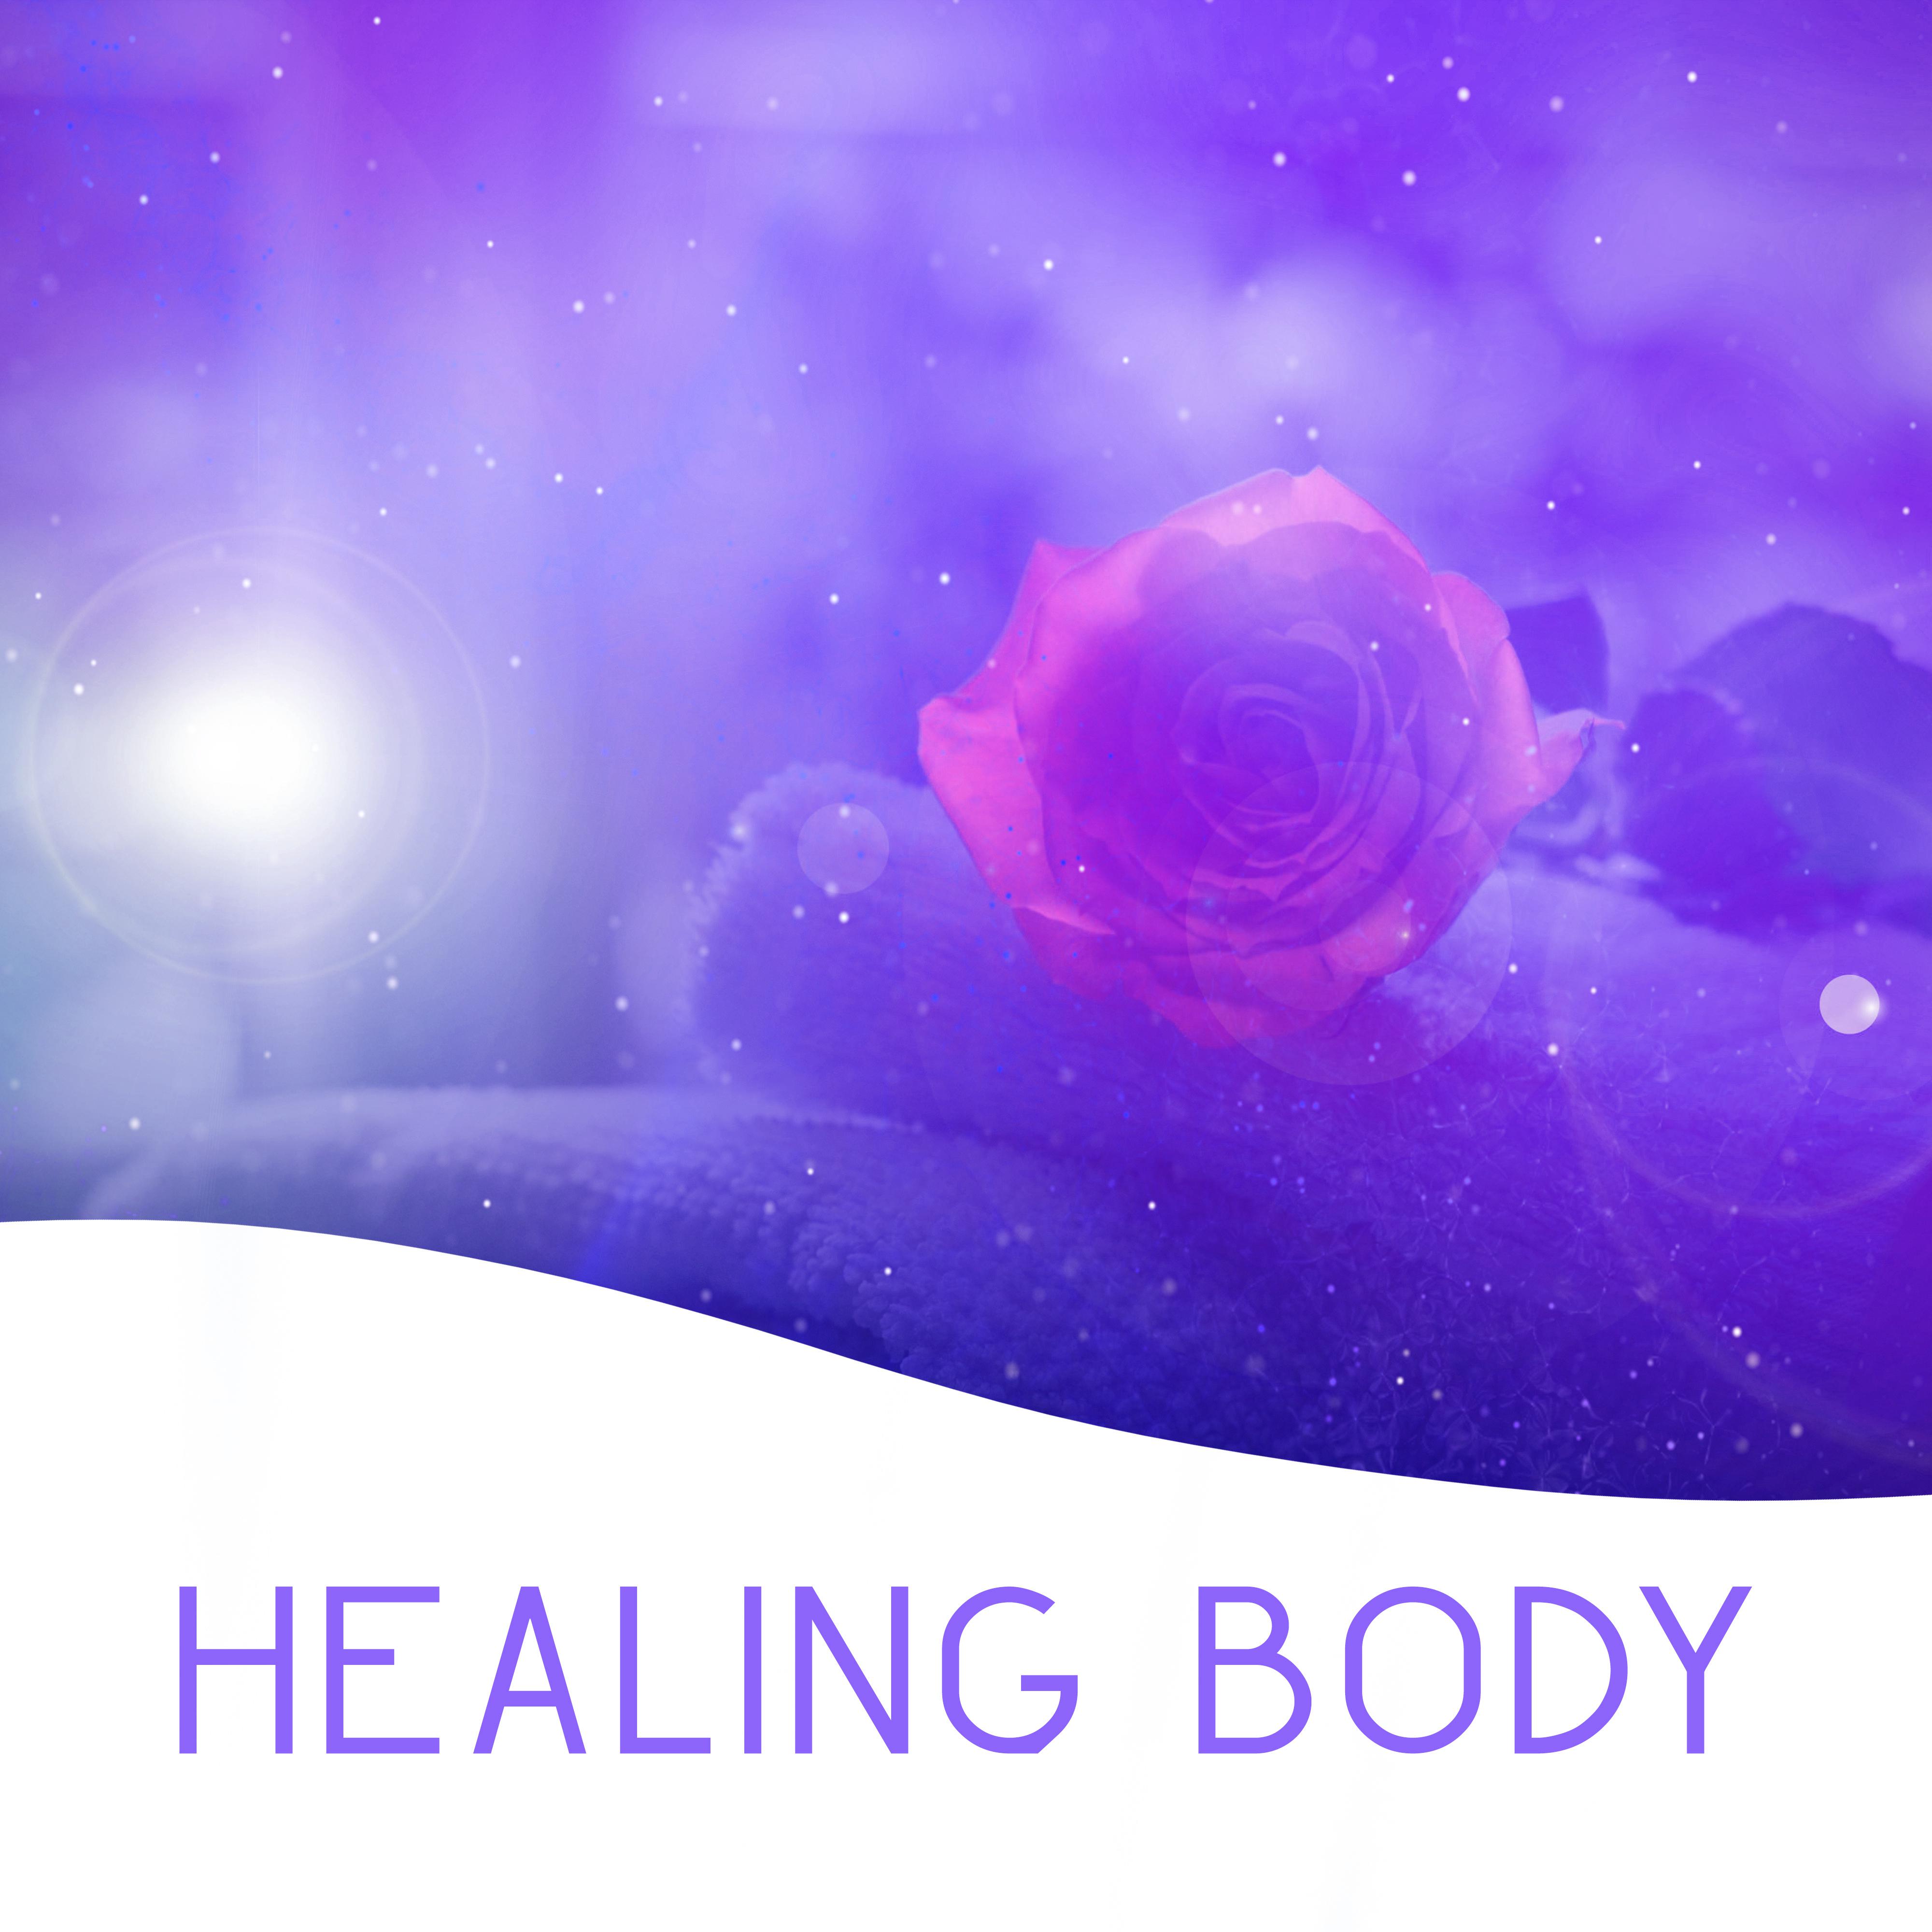 Healing Body – Spa Music, Peaceful Sounds for Deep Massage, Relaxation, Wellness, Inner Calmness, Pure Mind, Oriental Music to Calm Down